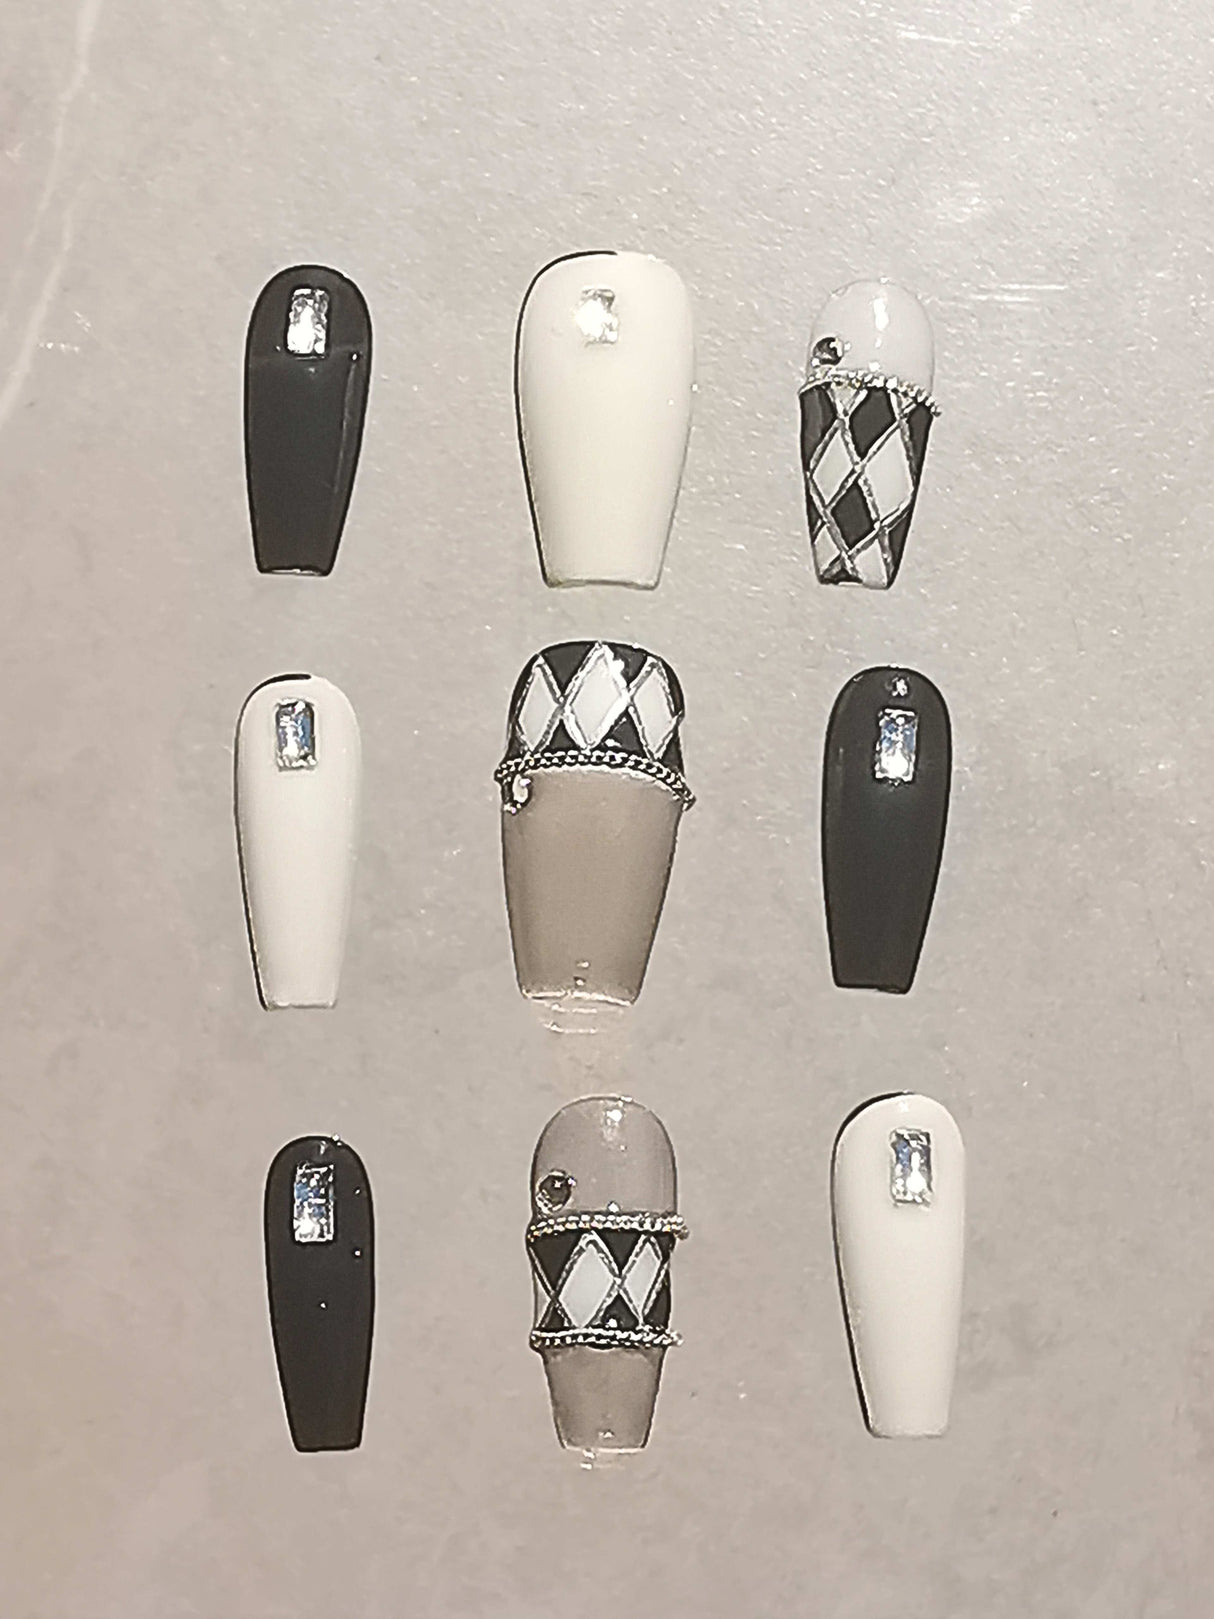 These black and white nails with rhinestones, argyle pattern, chains, and glossy finish are perfect for formal events or fashion statements.